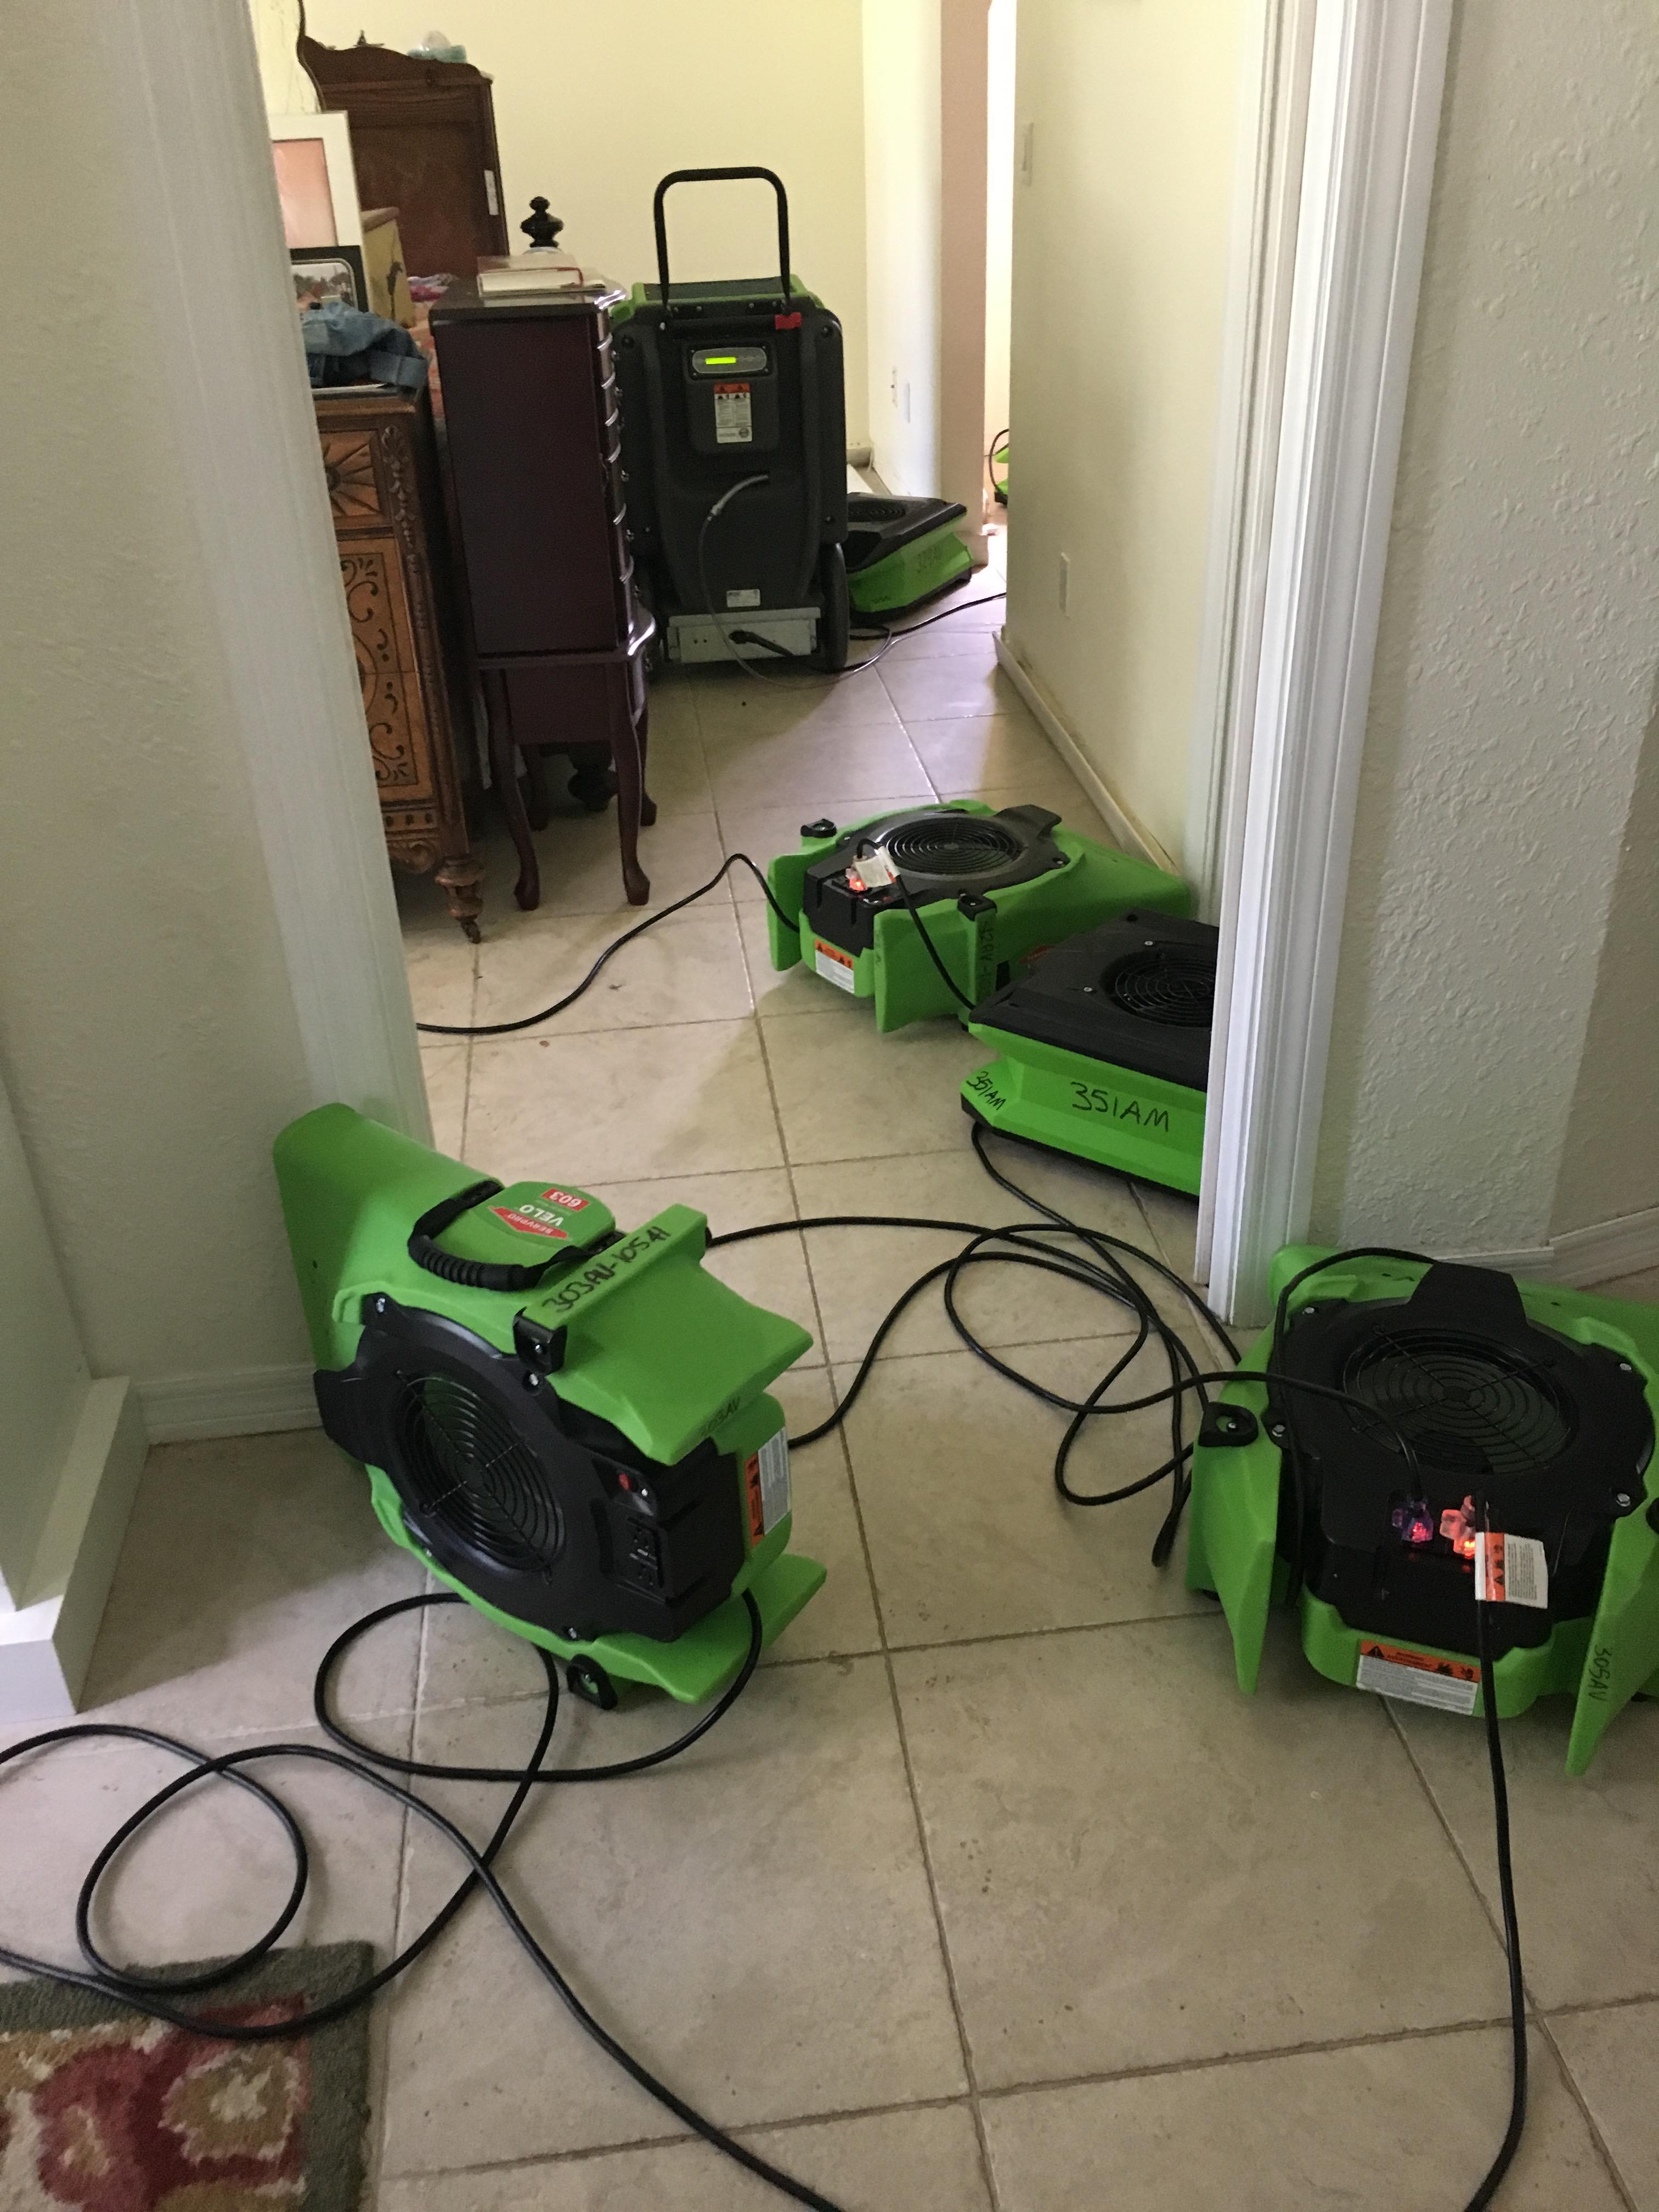 The SERVPRO equipment is up and running.  ÌMaking things Like it never even happened. Ì